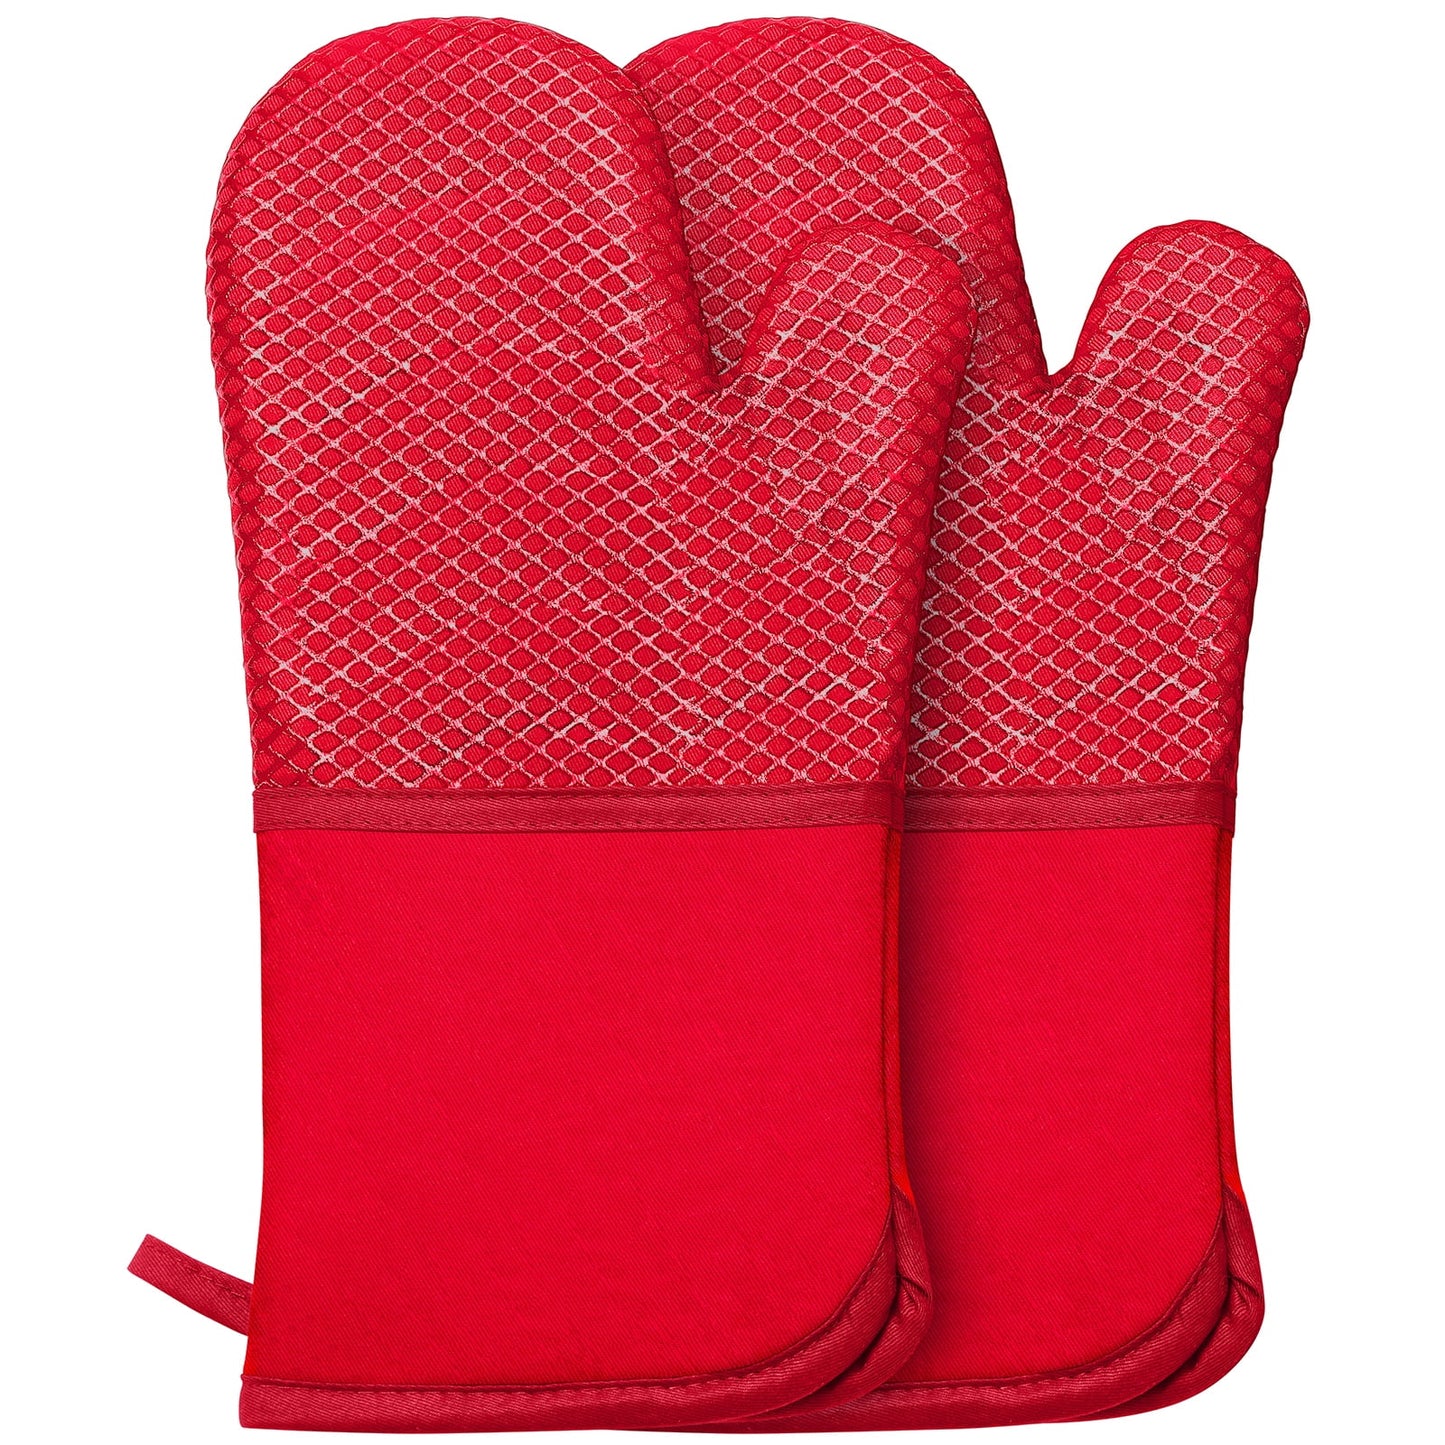 Oven Mitts, Heat Resistant Kitchen Oven Gloves 572°F, Non-Slip Silicone Surface, Extra Long Flexible Thick Mitts for Kitchen , Cooking , Baking , BBQ , Grid Red